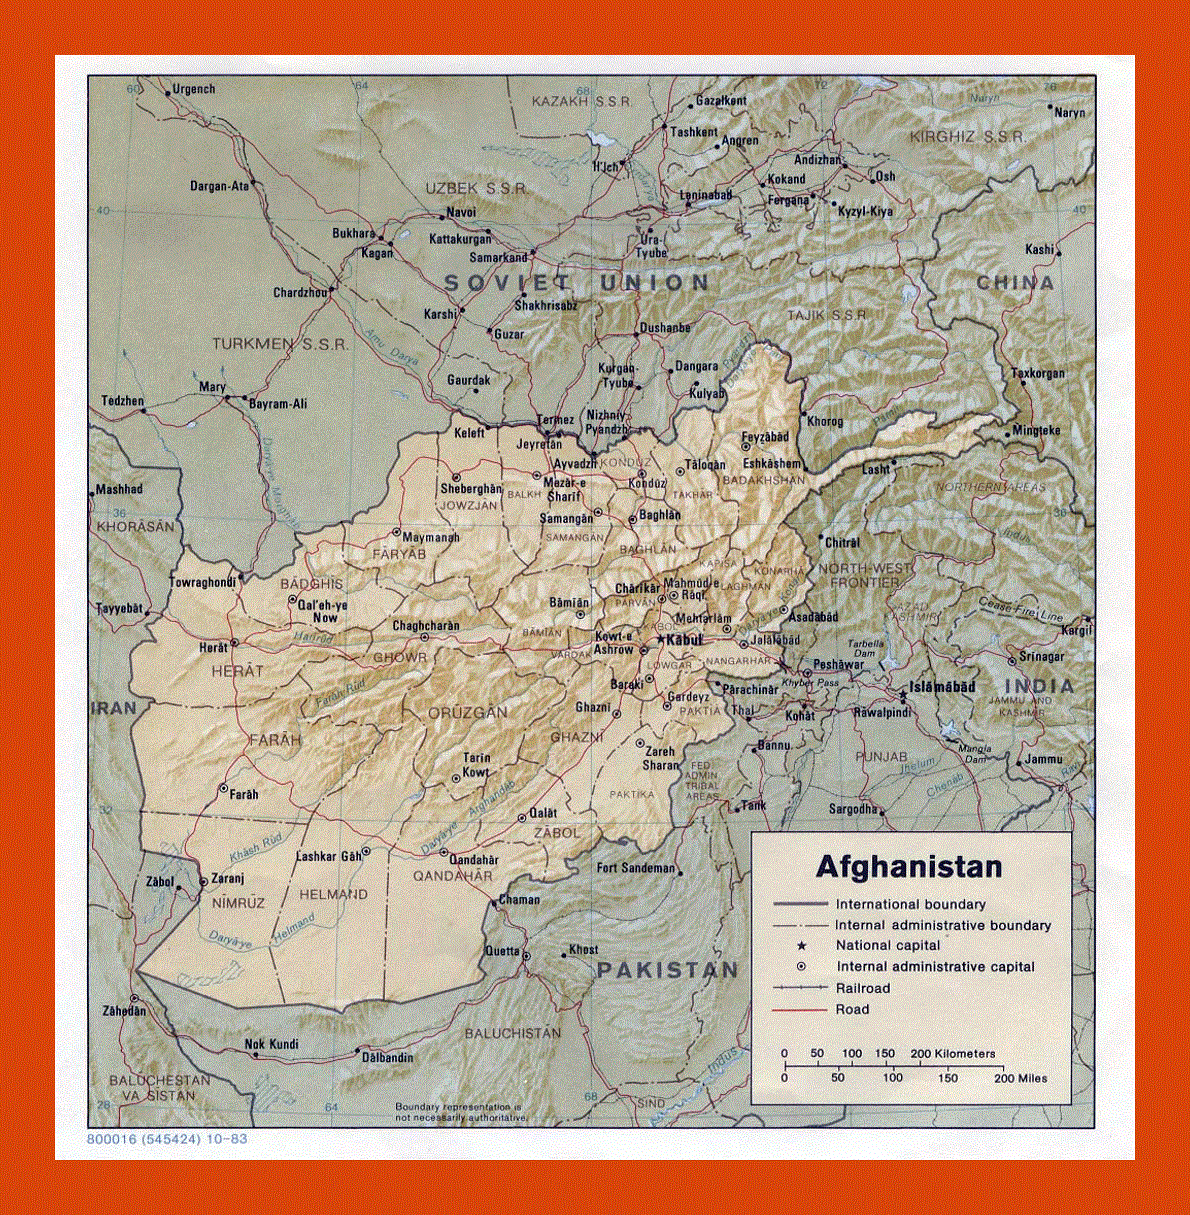 Political and administrative map of Afghanistan - 1983